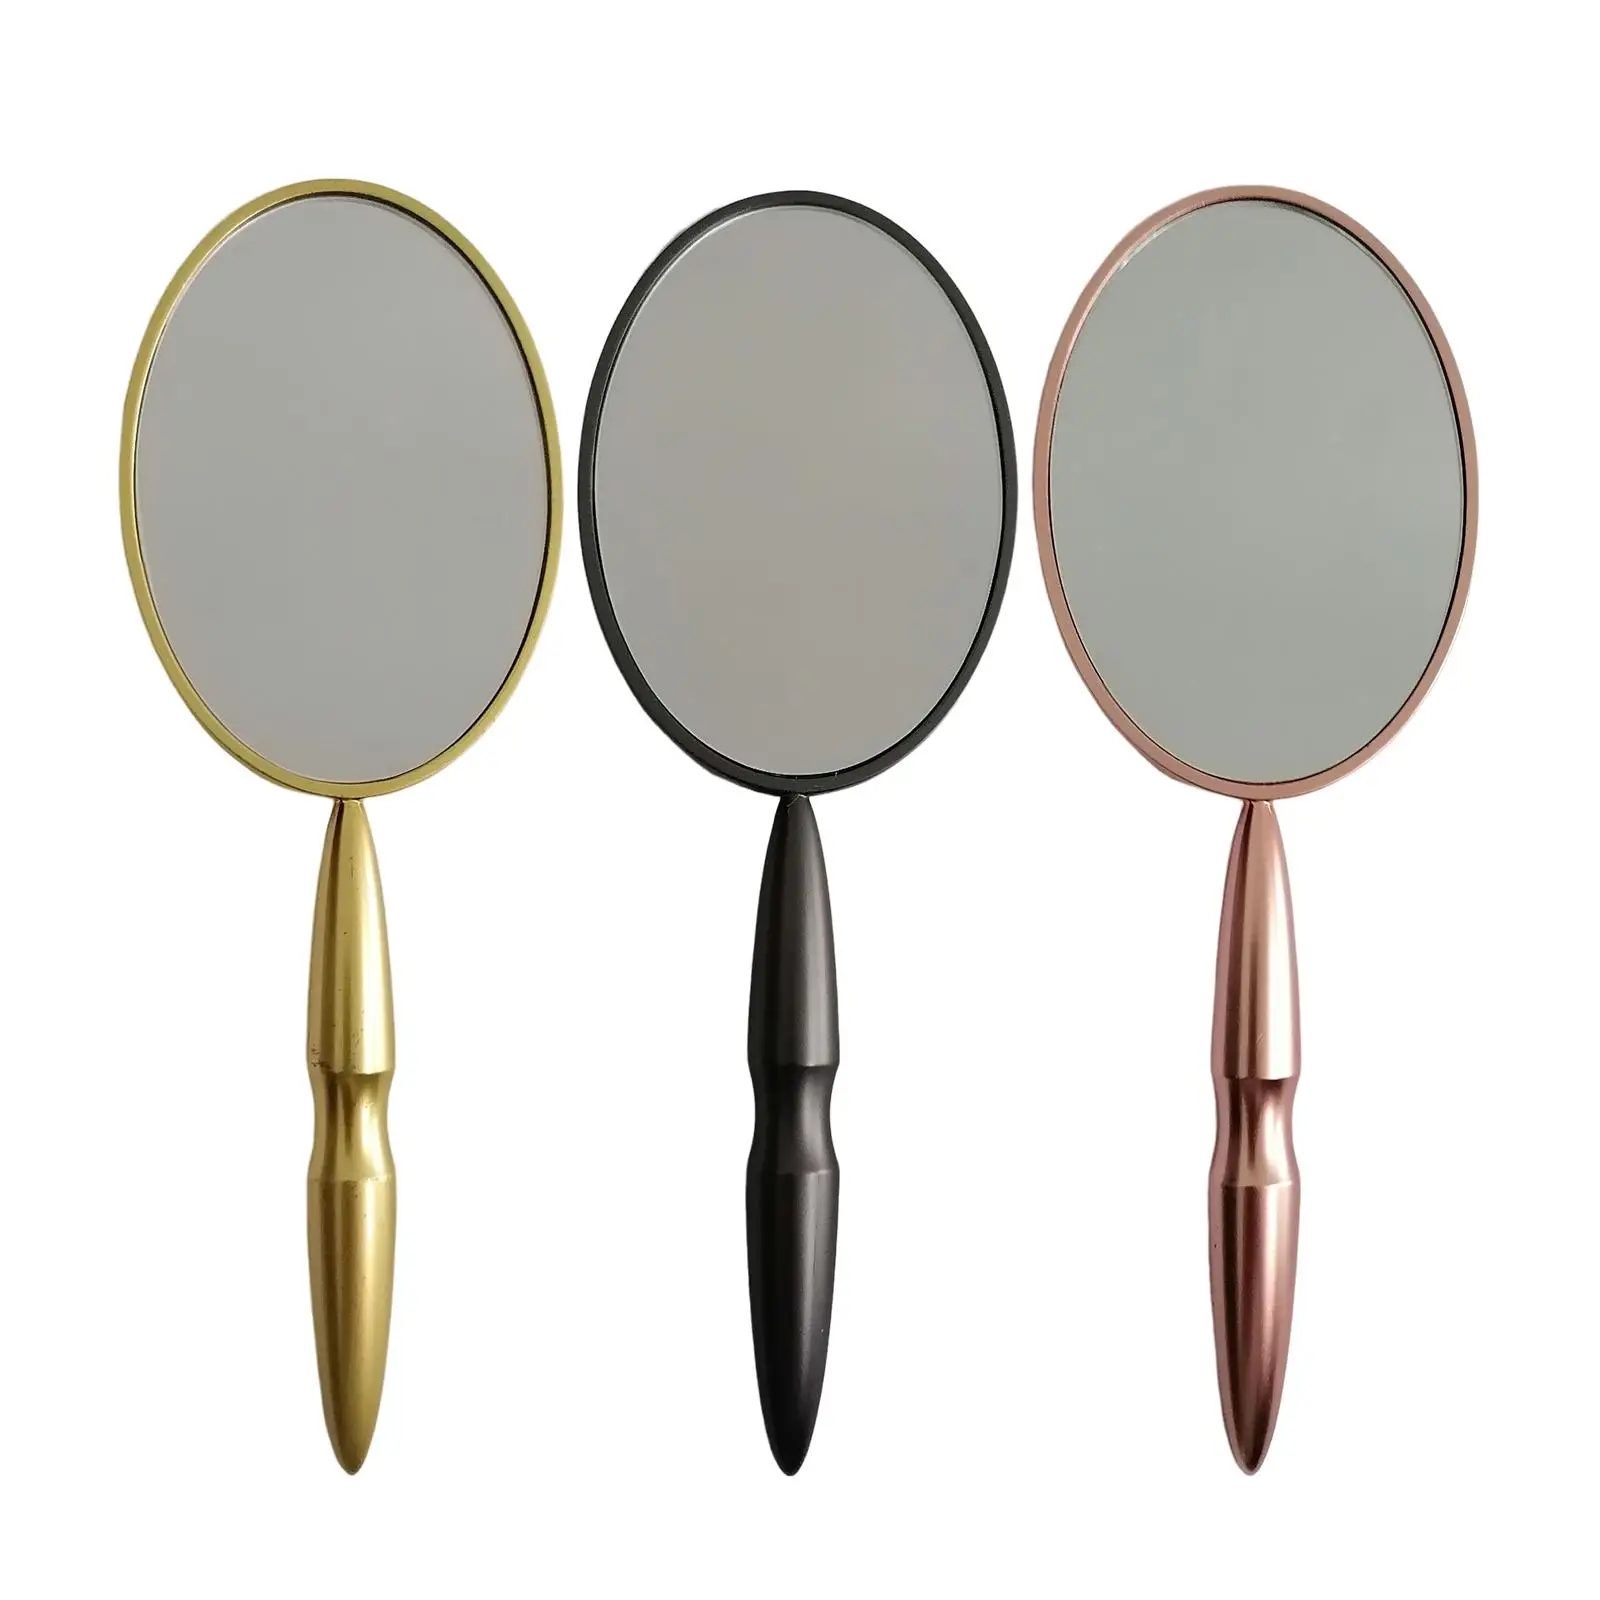 Handheld Mirror with Handle, Compact Mirrors Cosmetic Mirror DIY Makeup Mirror Travel Oval Shape Hand Mirror for Women Girls